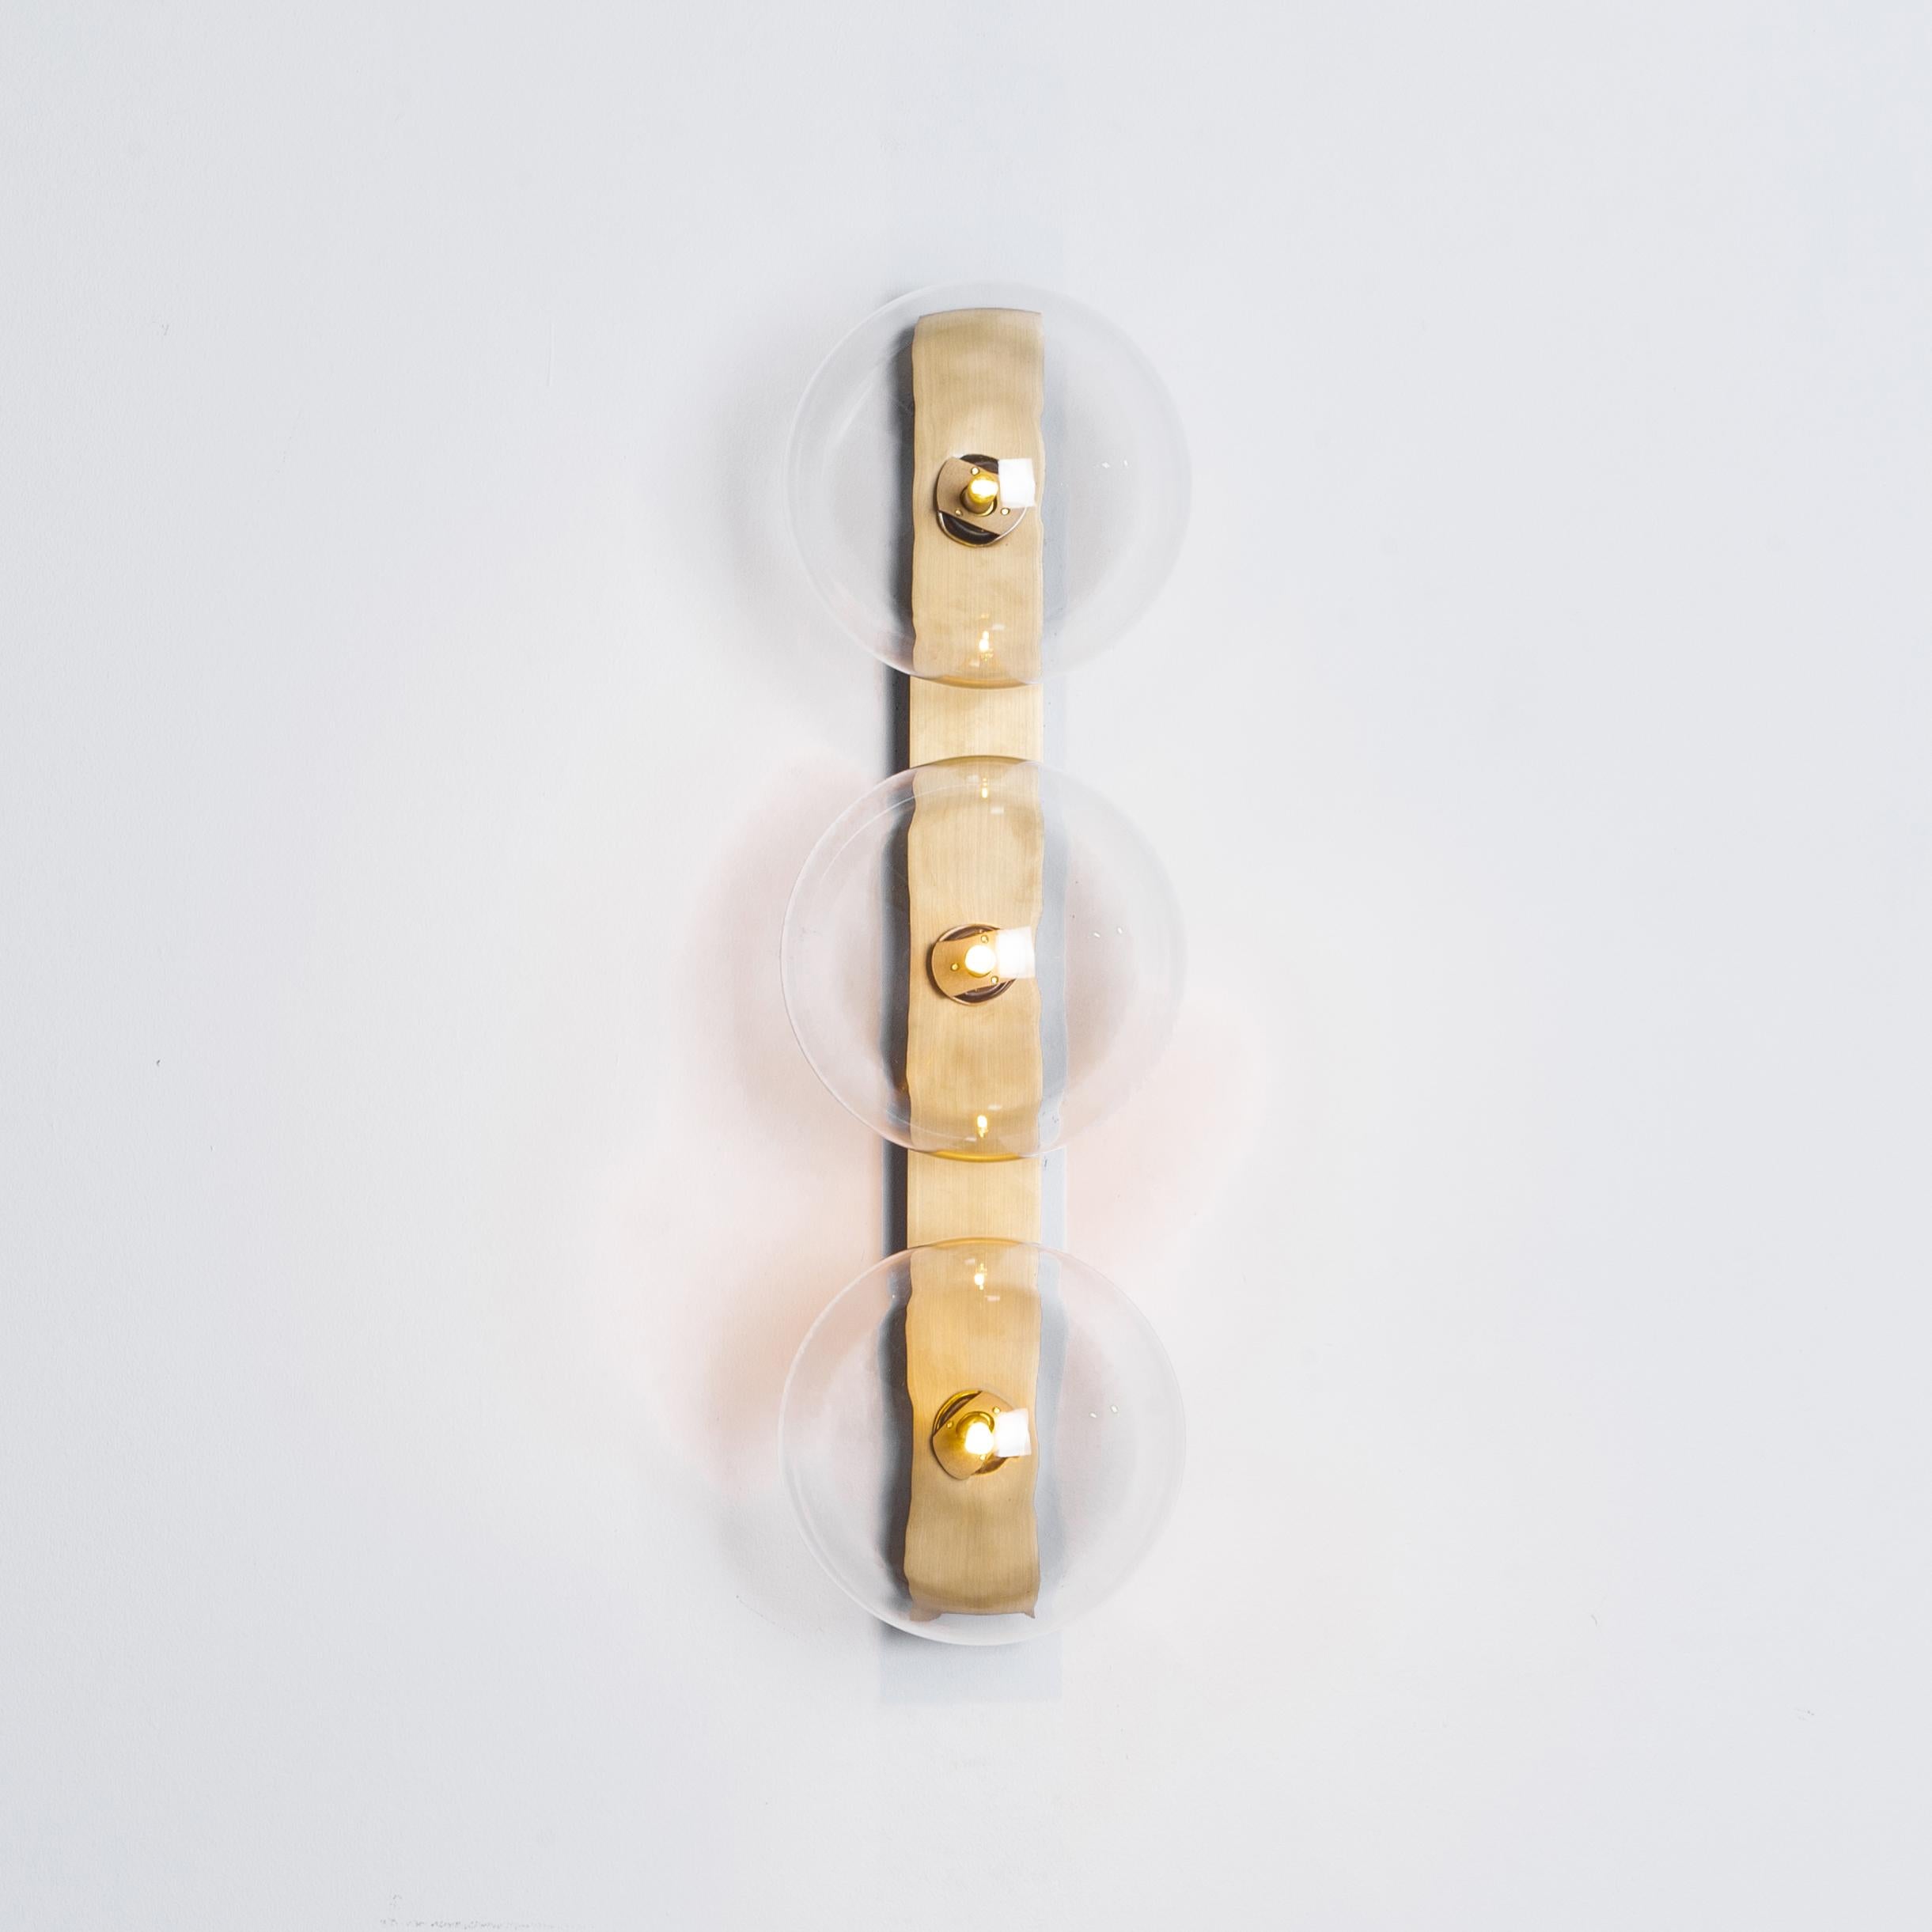 Oslo Triple brass wall sconce by Schwung
Dimensions: W 15 x D 19 x H 50 cm
Materials: Solid brass, hand blown glass globes

Finishes available: Black gunmetal, polished nickel, brass.
   

 Schwung is a german word, and loosely defined, means